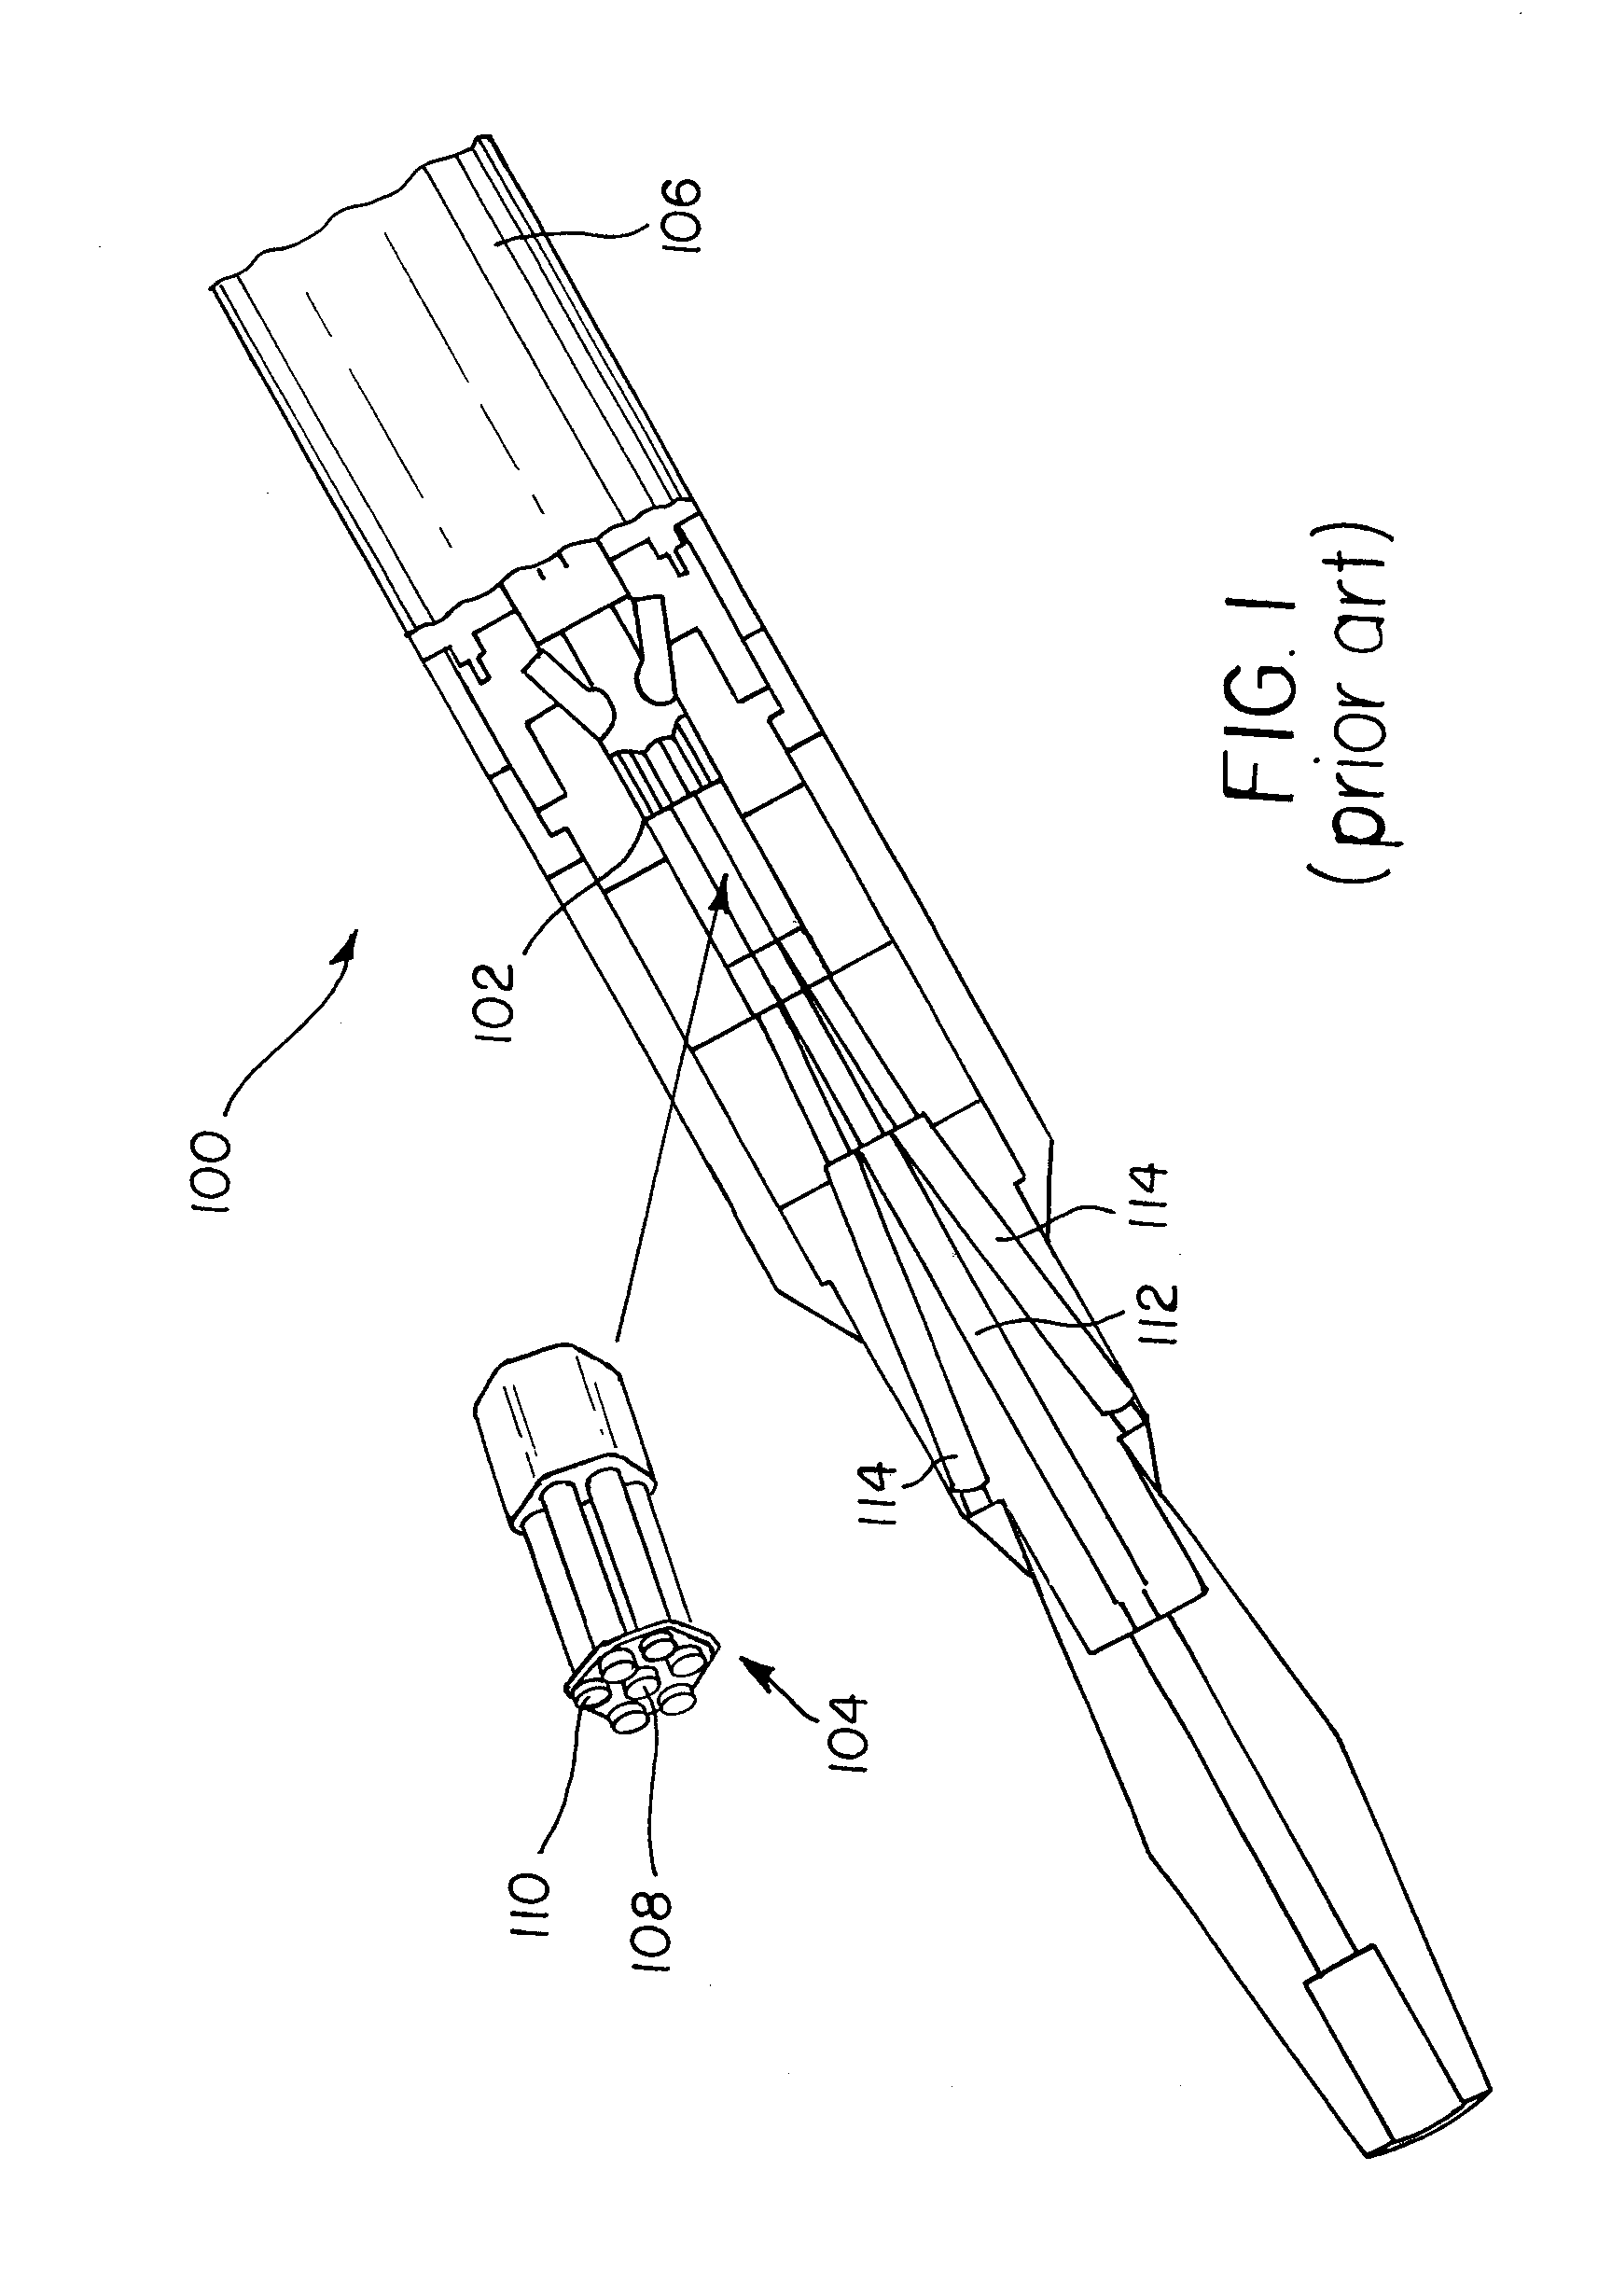 Multiple diverging projectile system